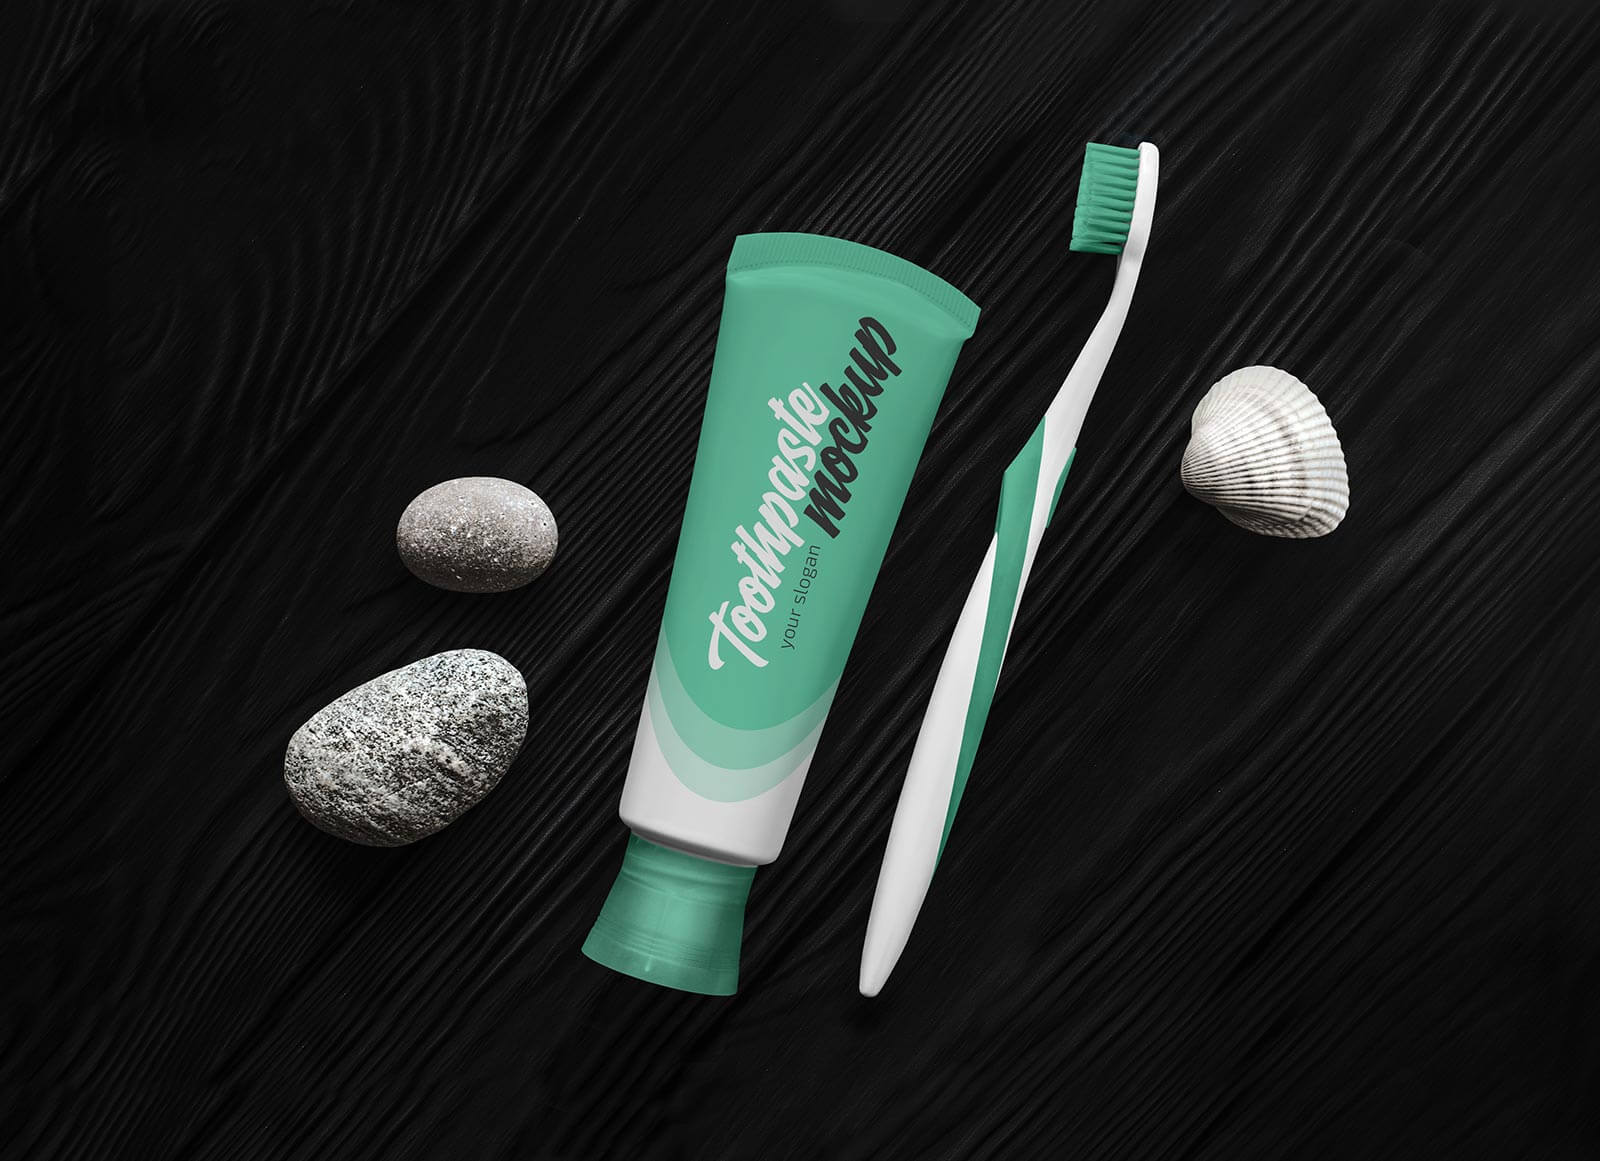 Free-Toothpaste-With-Toothbrush-Mockup-PSD